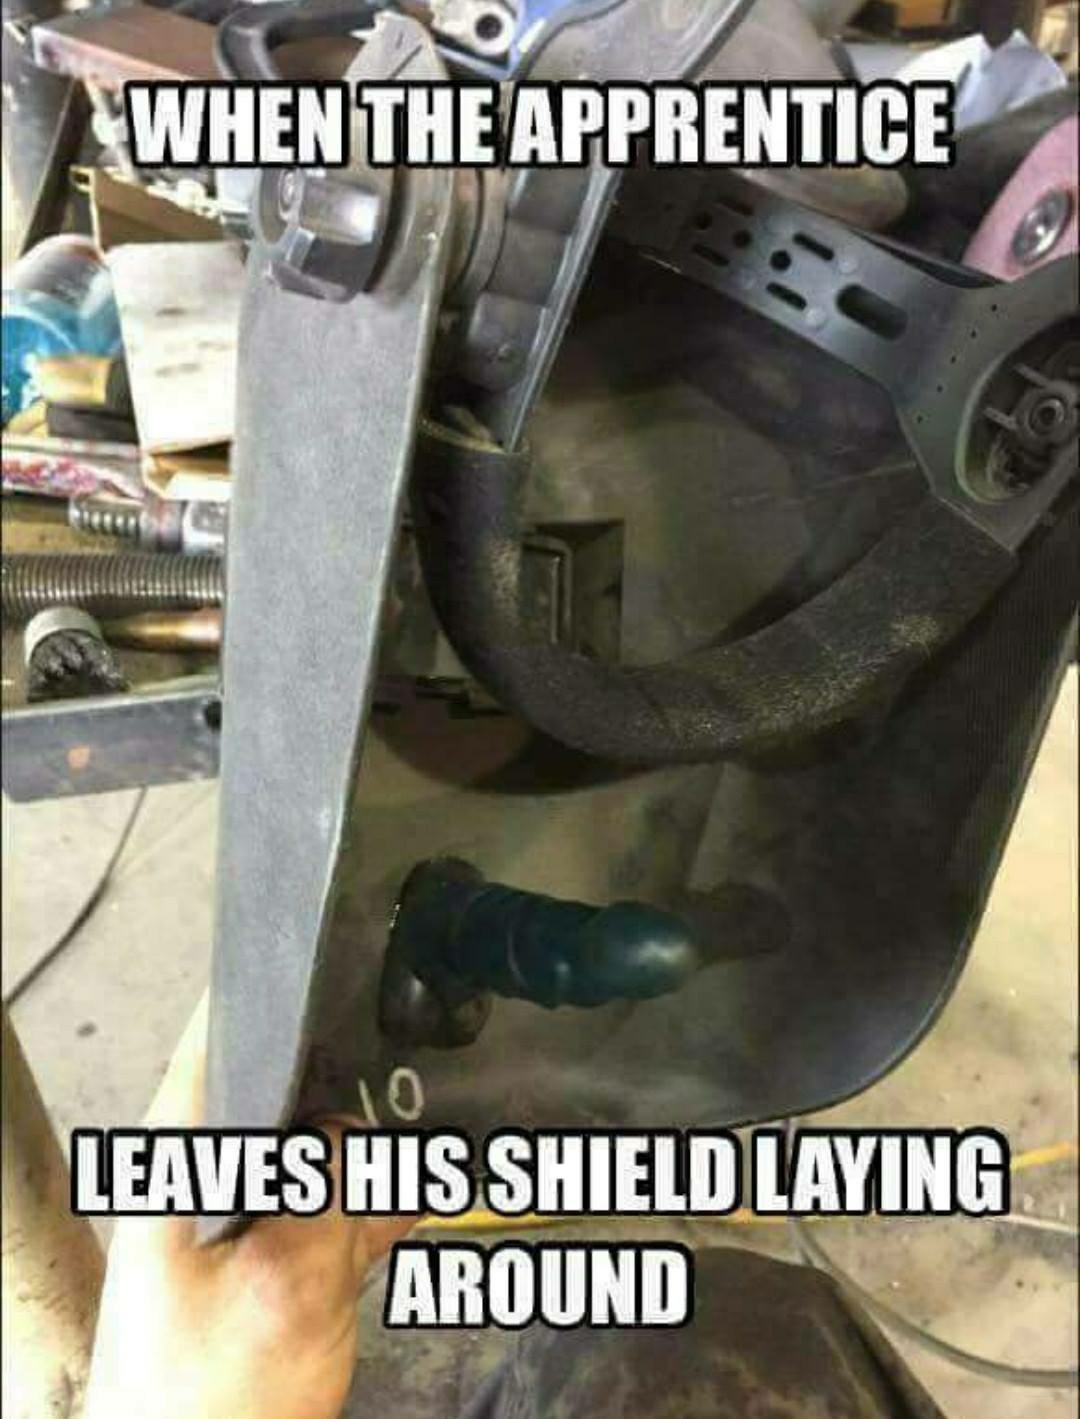 Welding mask meme of an apprentice who has a dildo affixed to the mask so he can hold it in place with his mouth while...